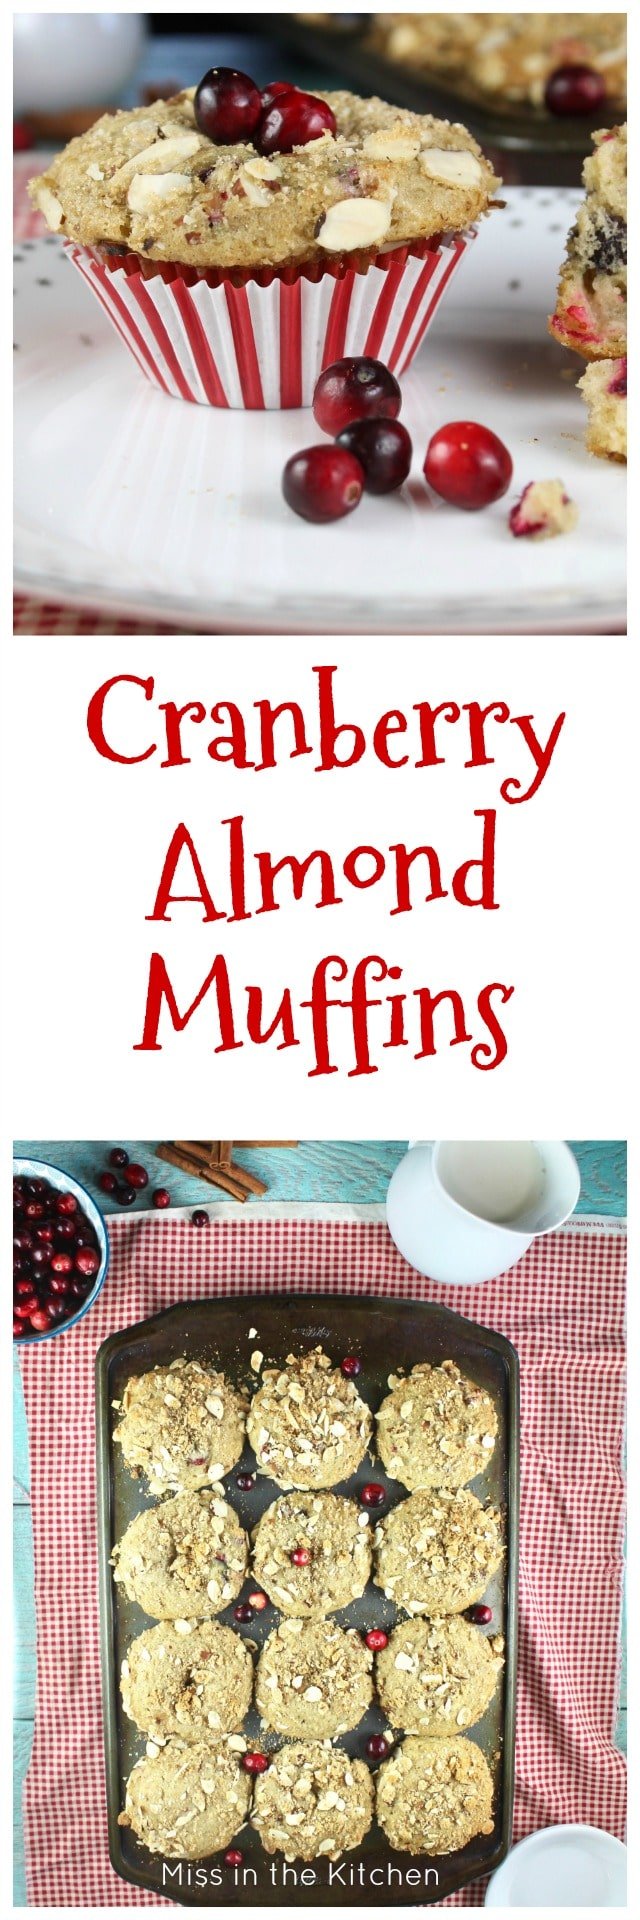 Cranberry Almond Muffins Recipe perfect for holiday mornings! From MissintheKitchen.com